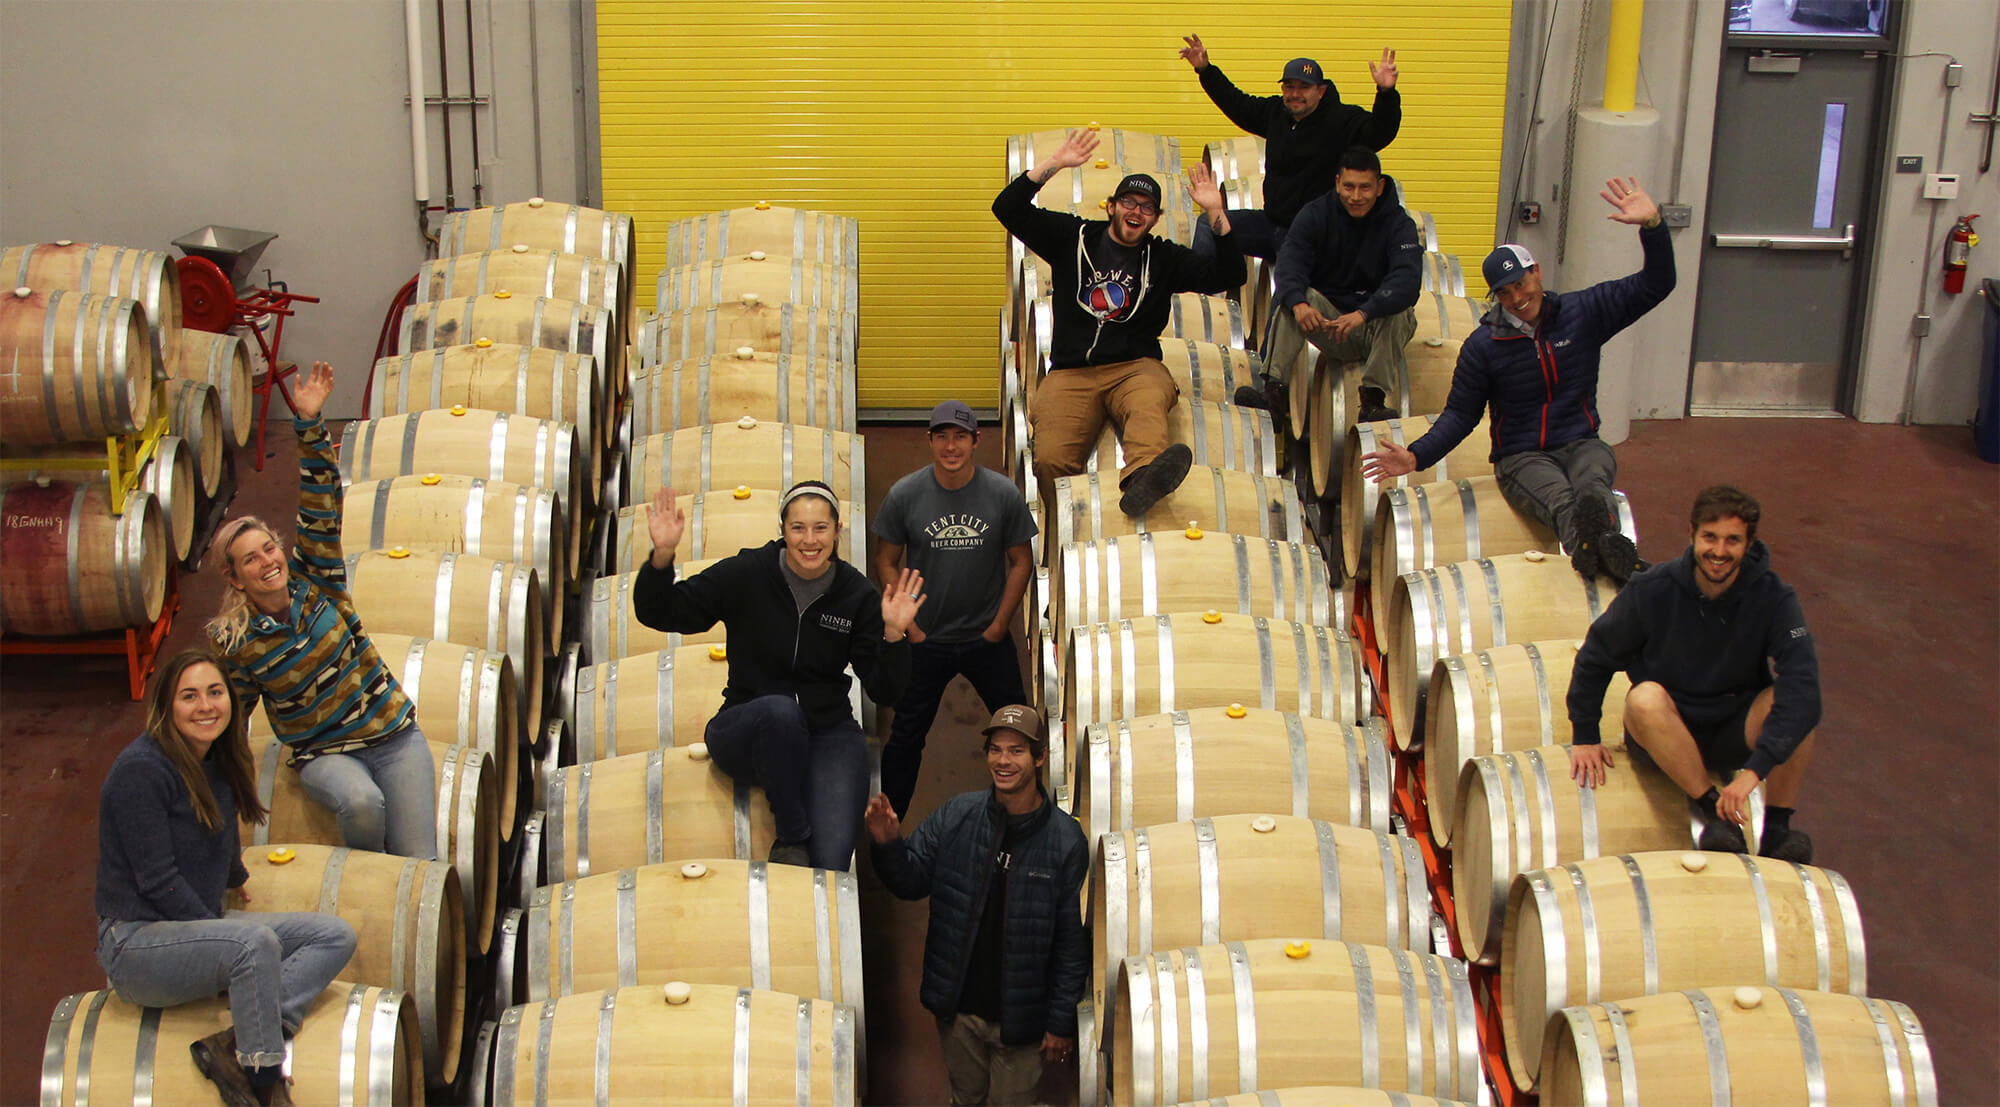 Our Cellar team posing on rows of barrels